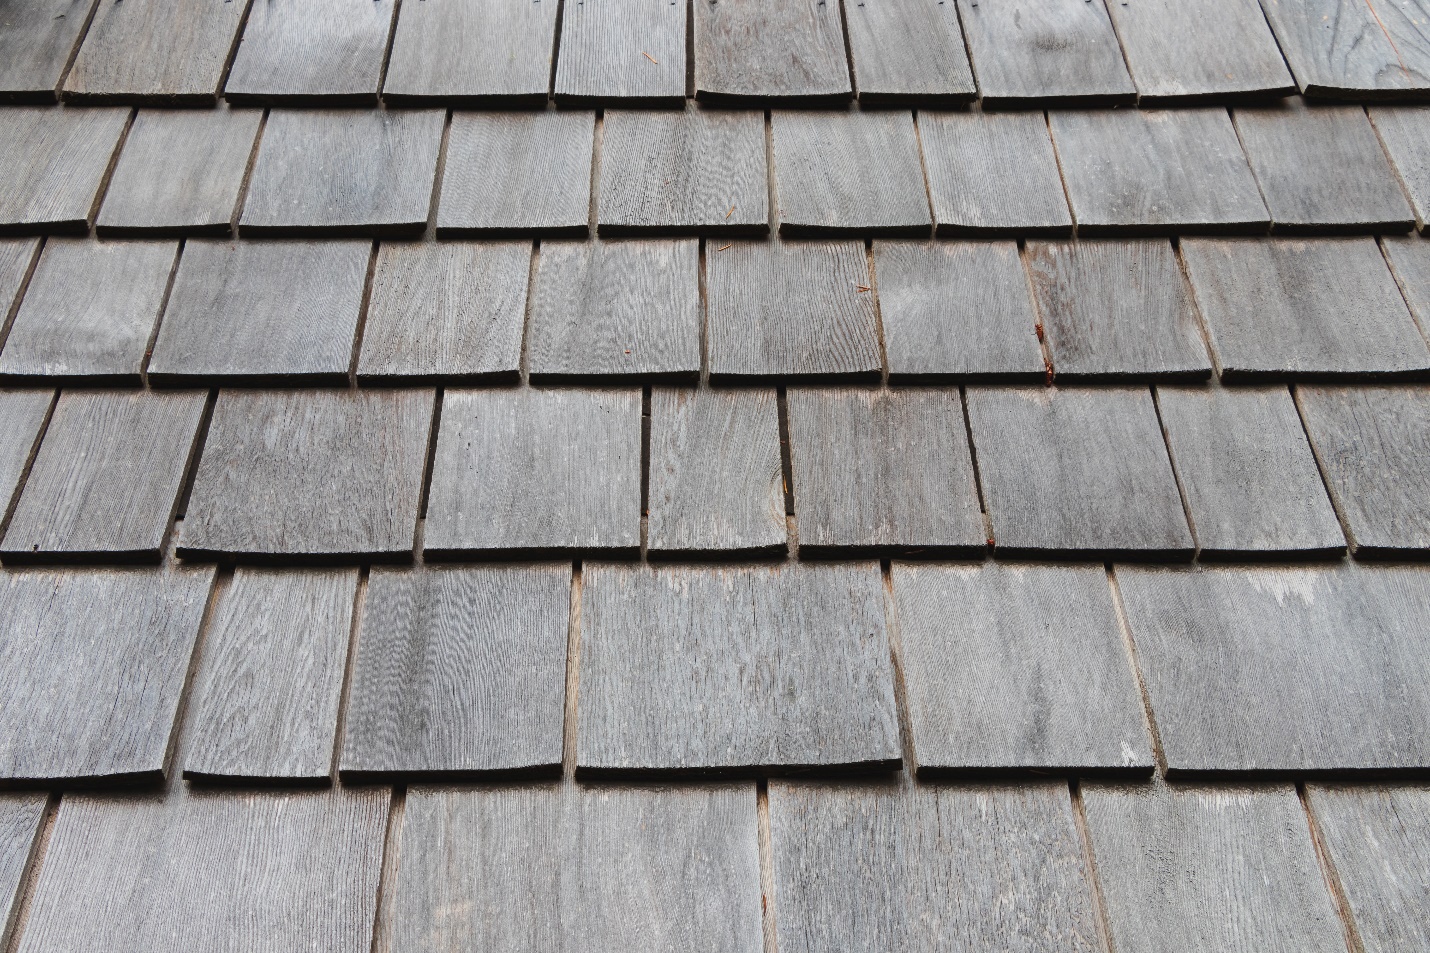 Faded shingles on rooftop captured by our Santa Fe Springs roofing contractors.